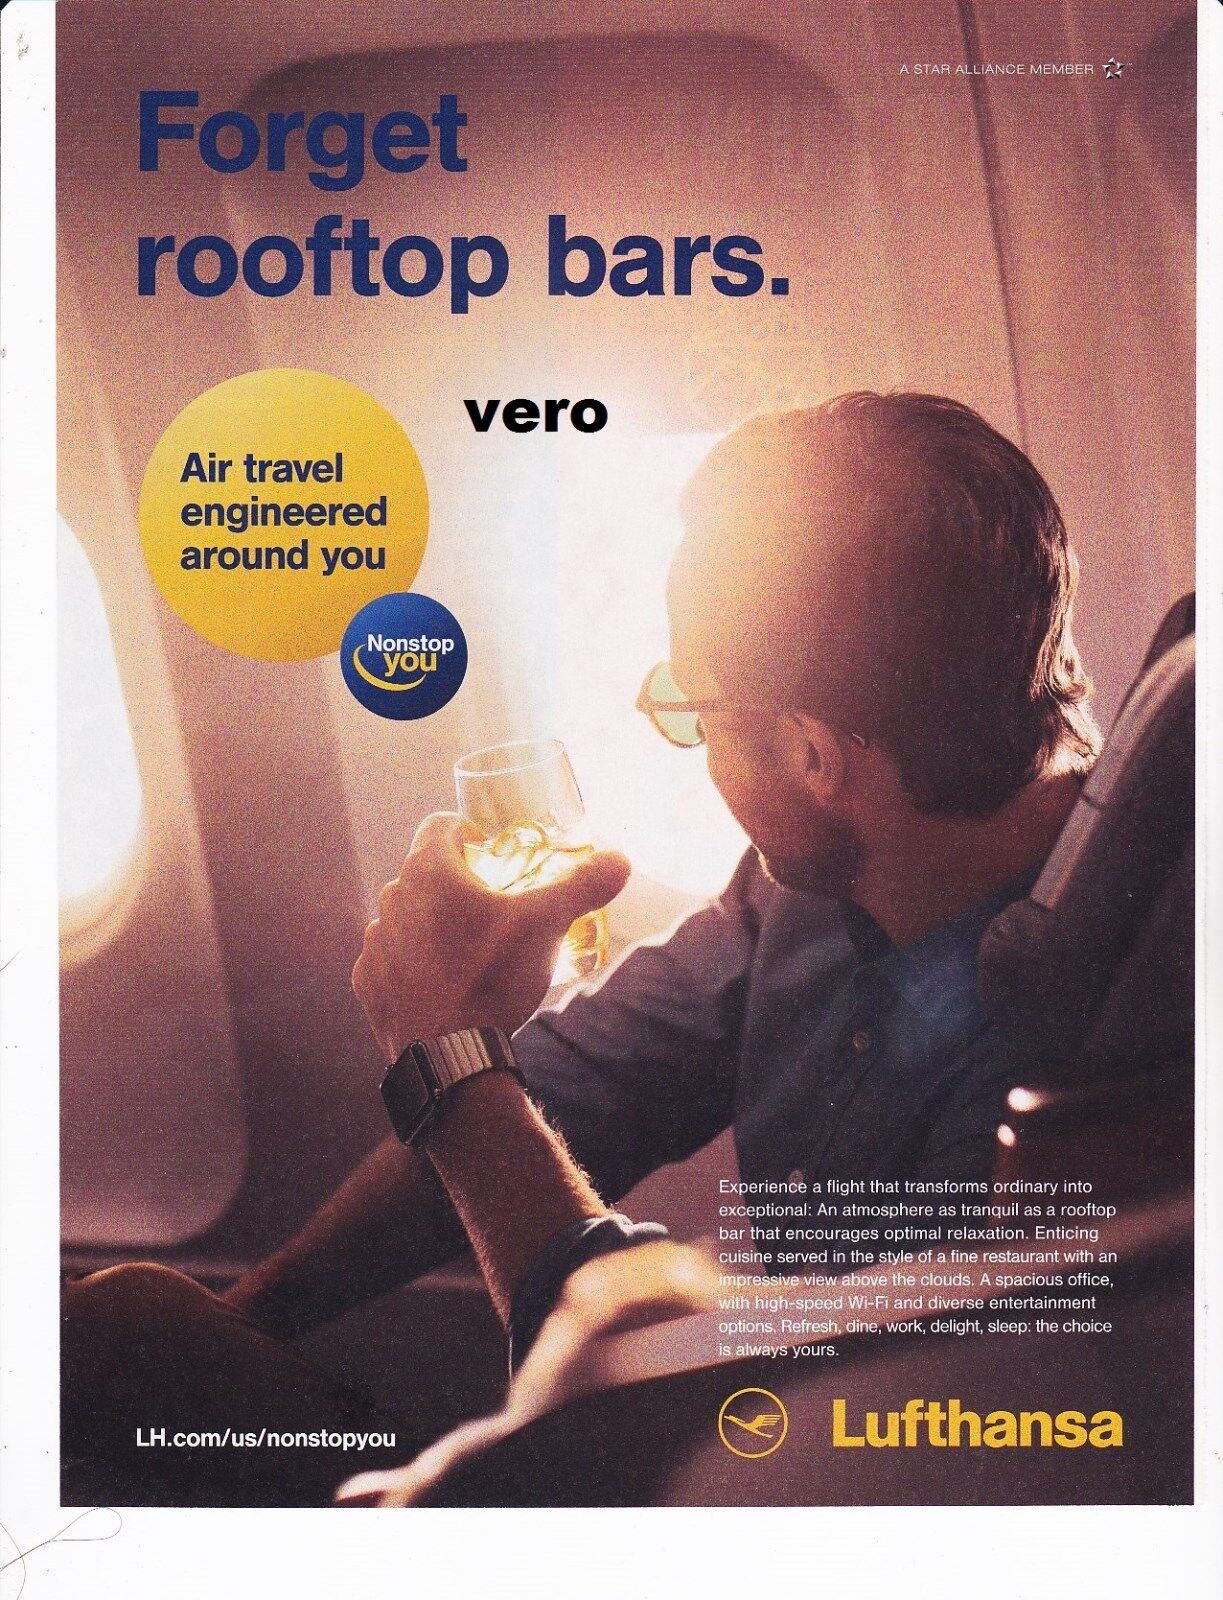 LUFTHANSA LH airline 2017 magazine ad clipping print advertisement ROOFTOP BARS